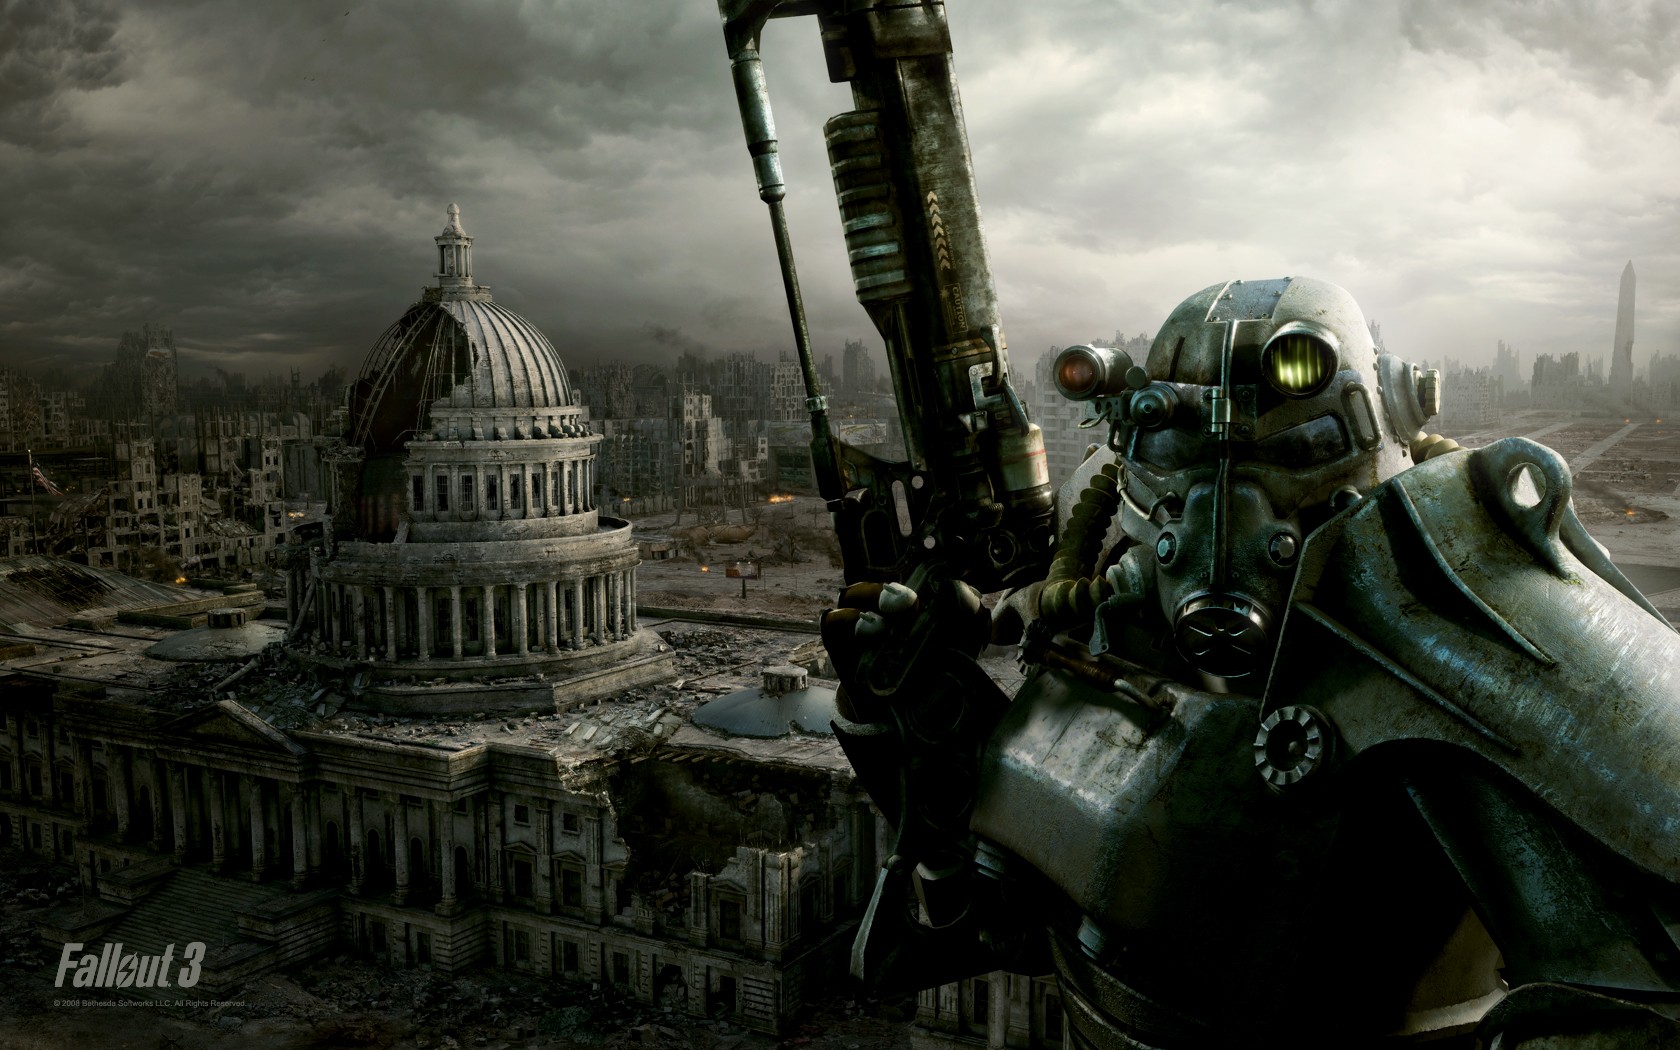 General 1680x1050 Fallout Fallout 3 video games apocalyptic Washington (state) PC gaming video game art futuristic Bethesda Softworks 2008 (Year) ruins